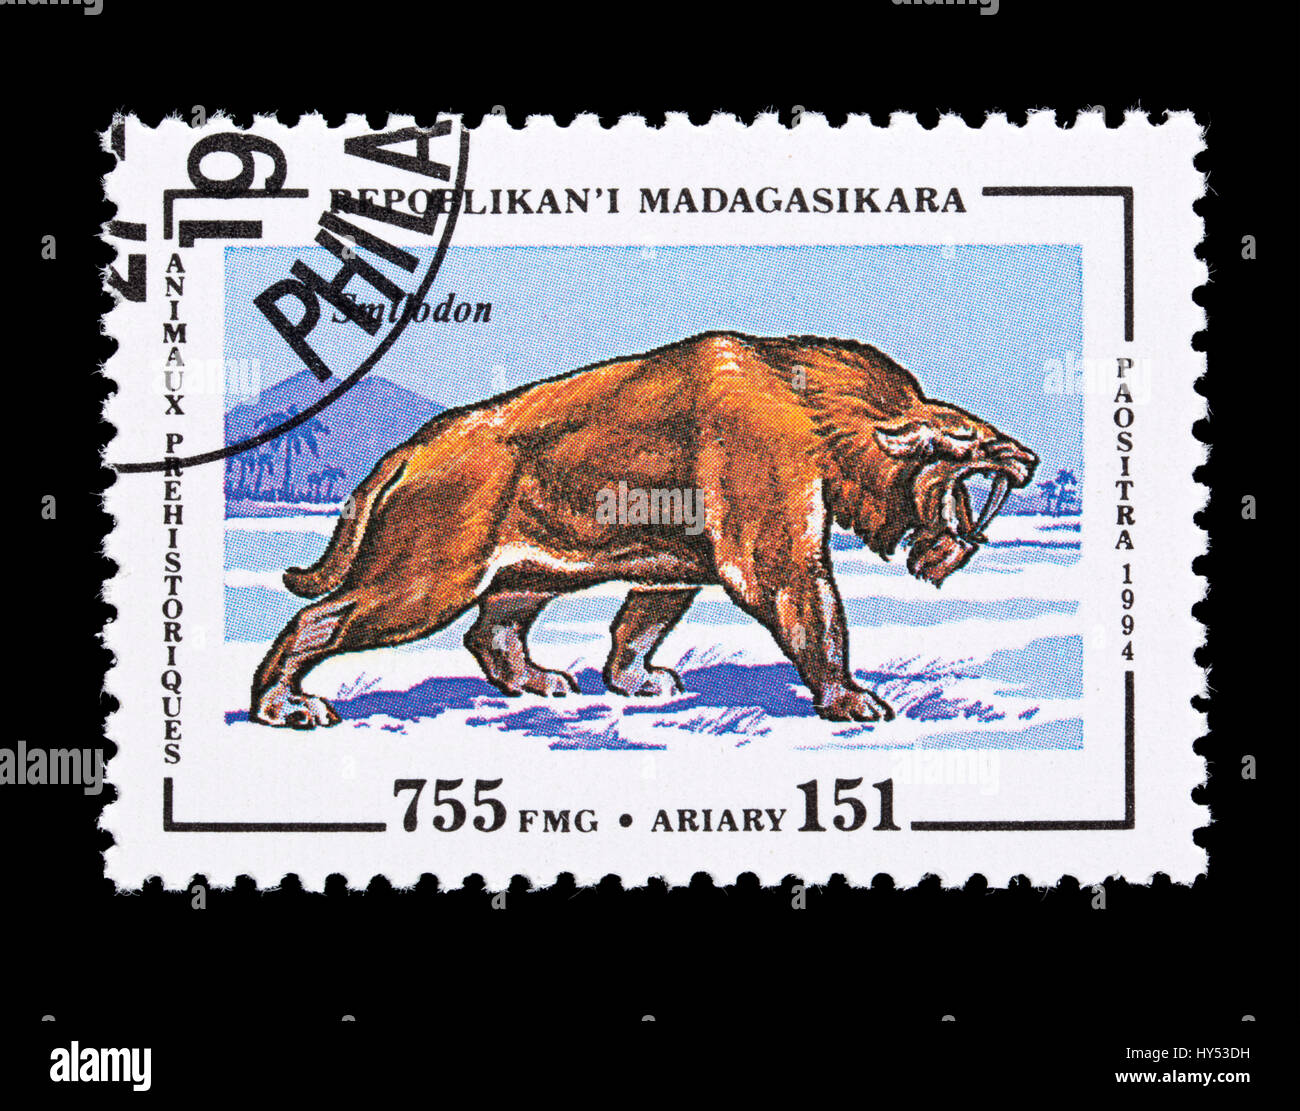 Postage stamp from Madagascar depicting a smilodon Stock Photo